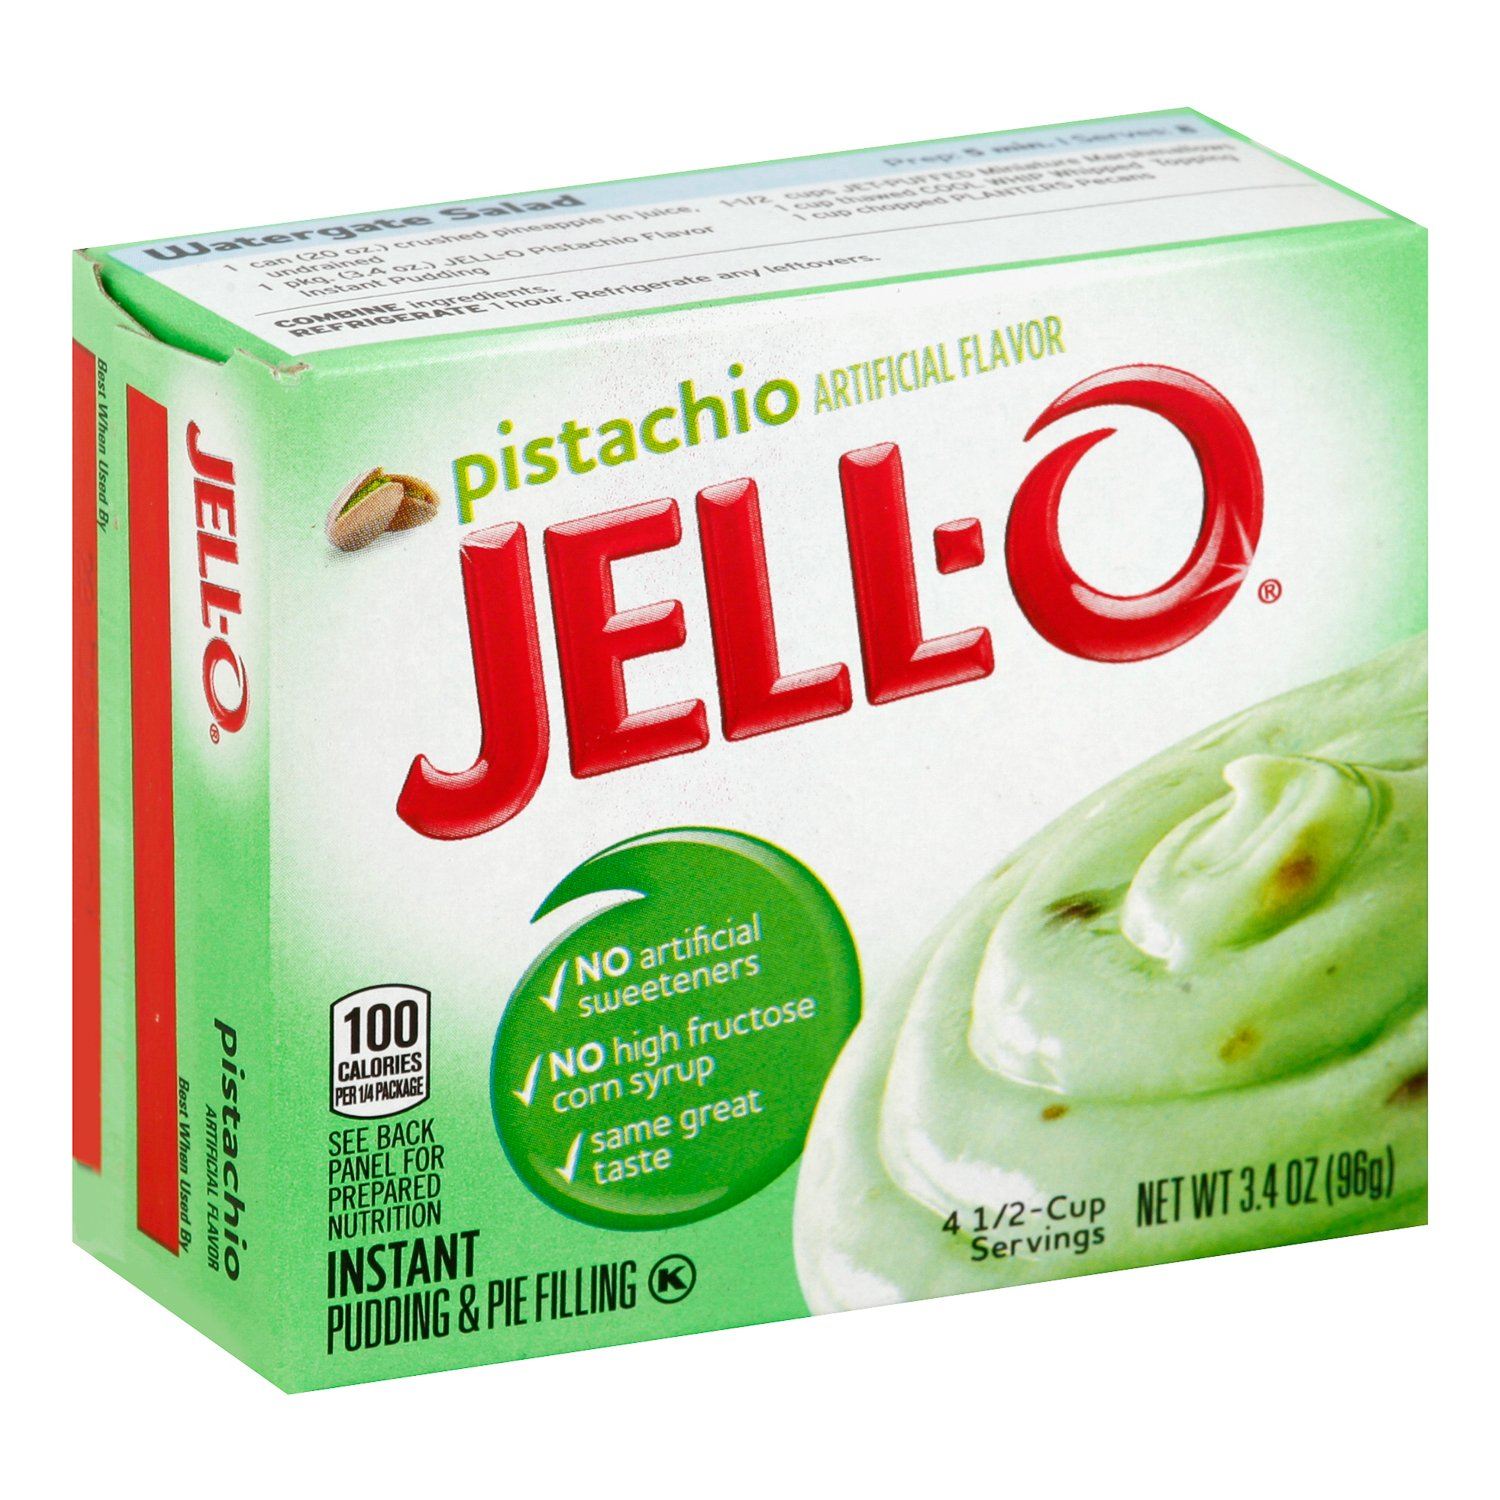 Jell-O Instant Pudding & Pie Filling Mixes Jell-O Pistachio 3.4 Ounce 